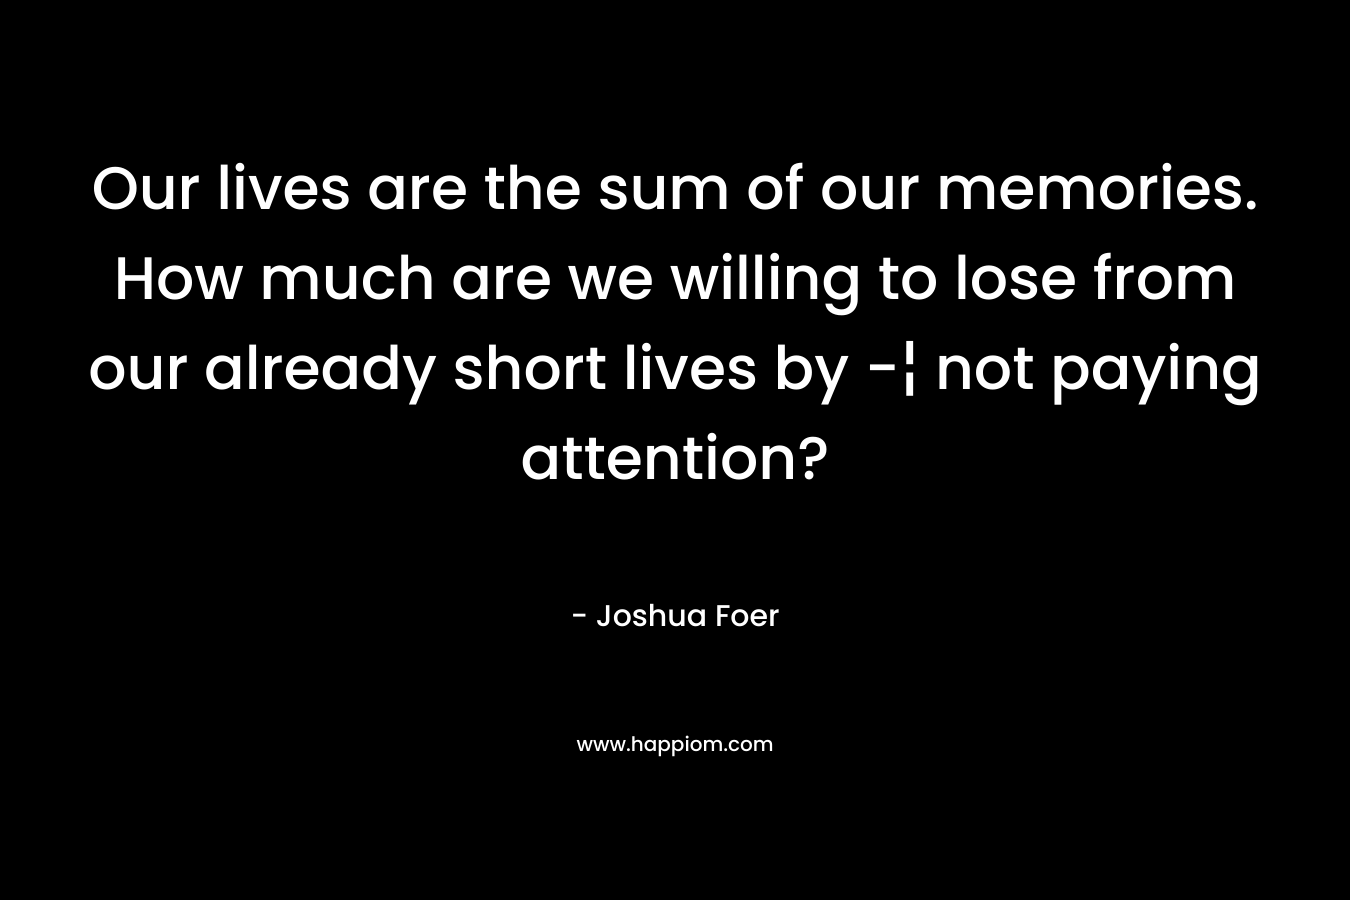 Our lives are the sum of our memories. How much are we willing to lose from our already short lives by -¦ not paying attention?